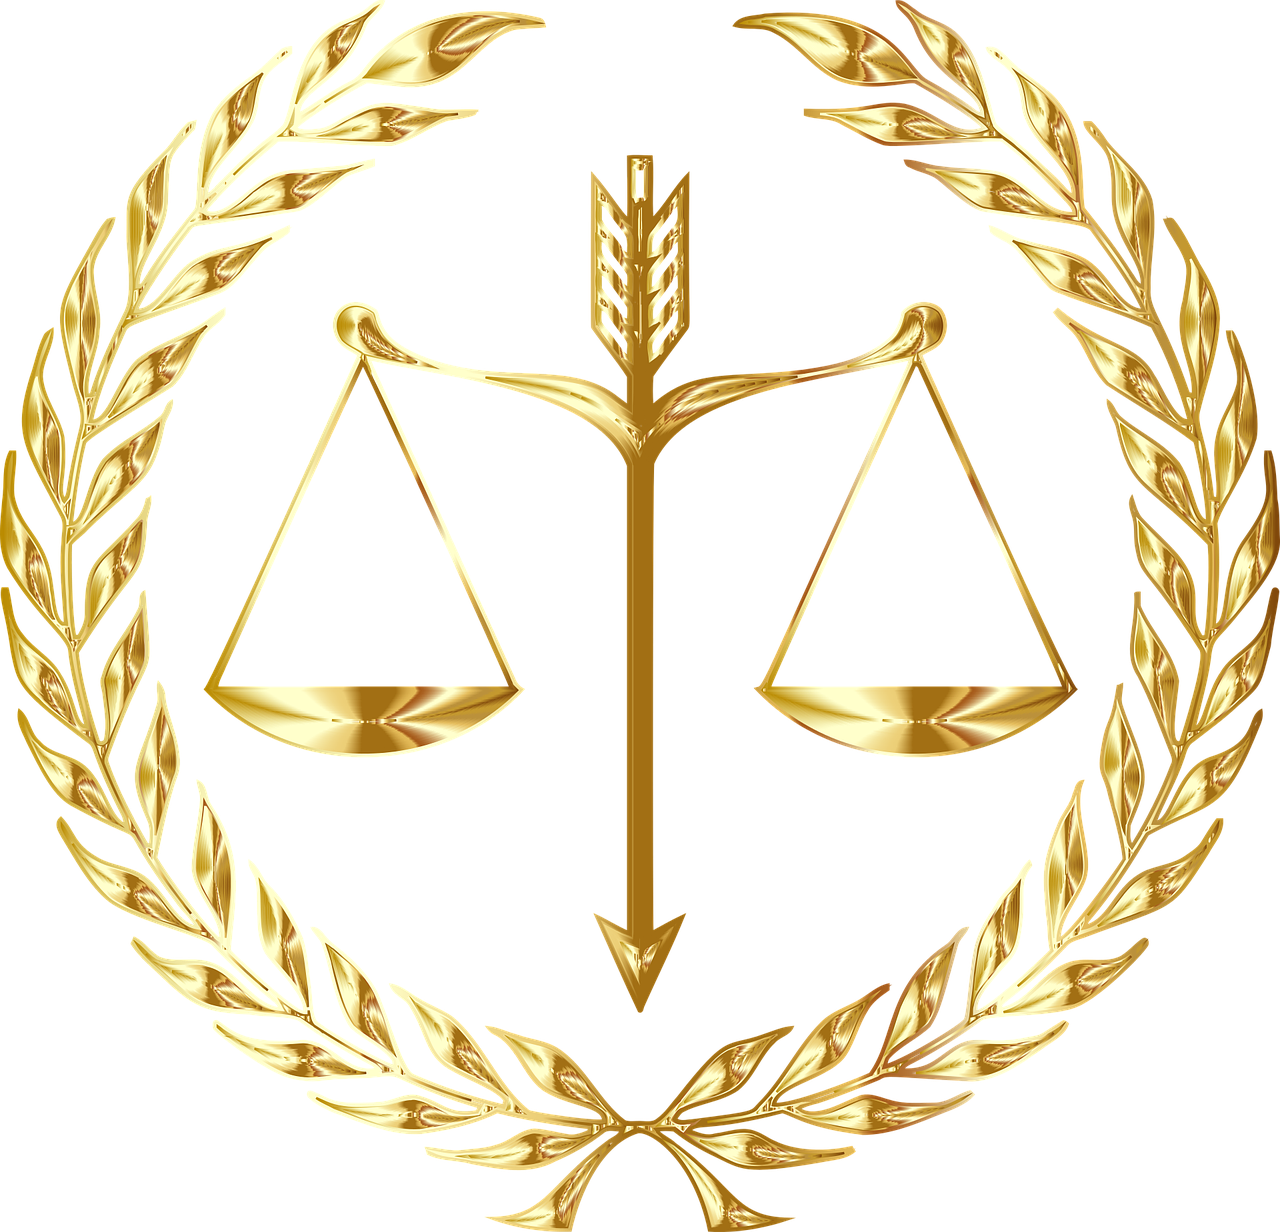 justice-gd946dce7c_1280.png